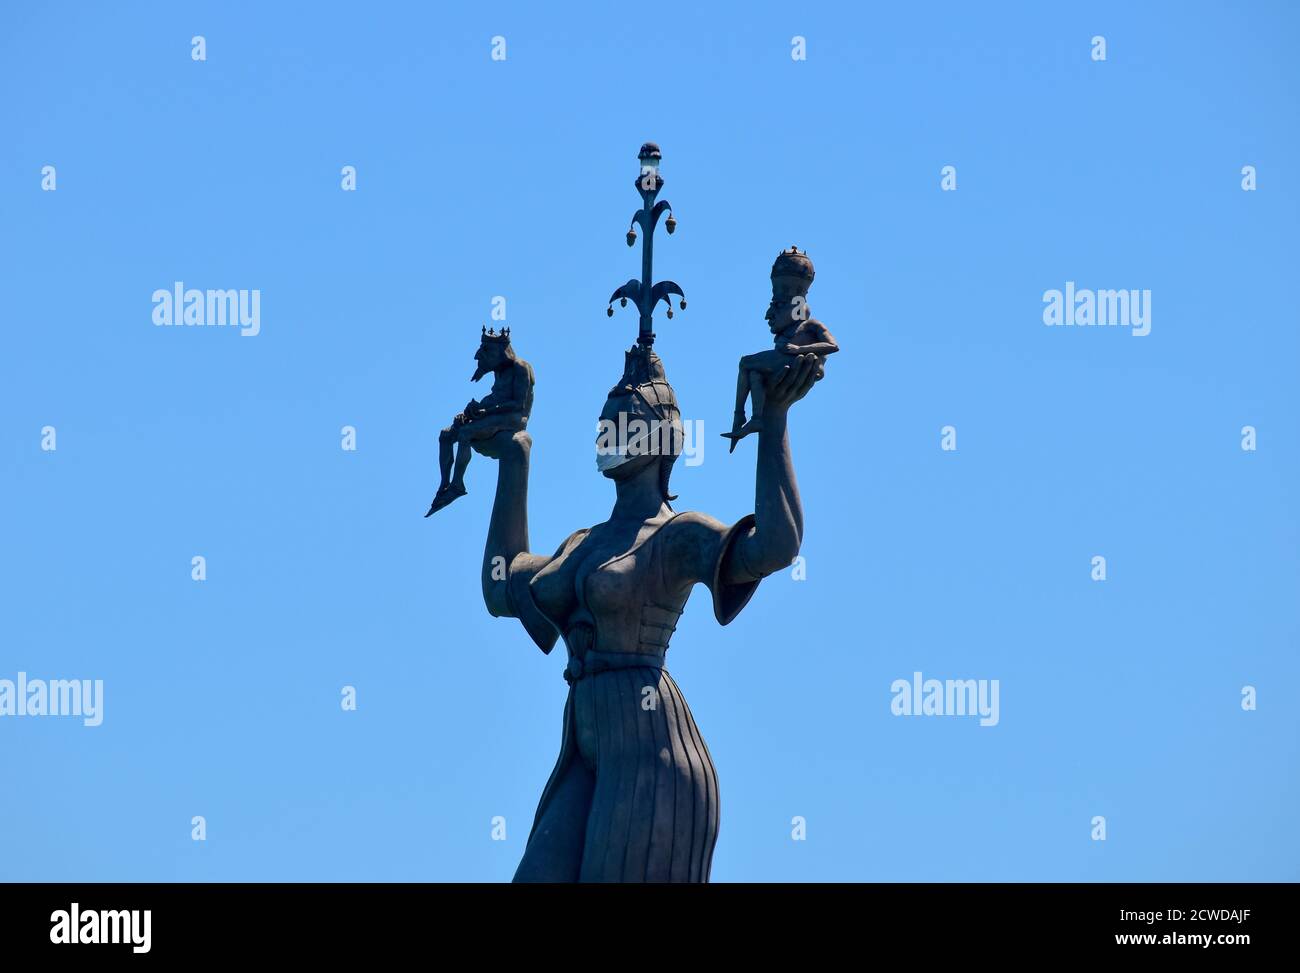 Konstanz, Germany - May 27, 2020: Imperia statue at the entrance of the harbour of Konstanz with medical mask in Coronavirus time. Stock Photo